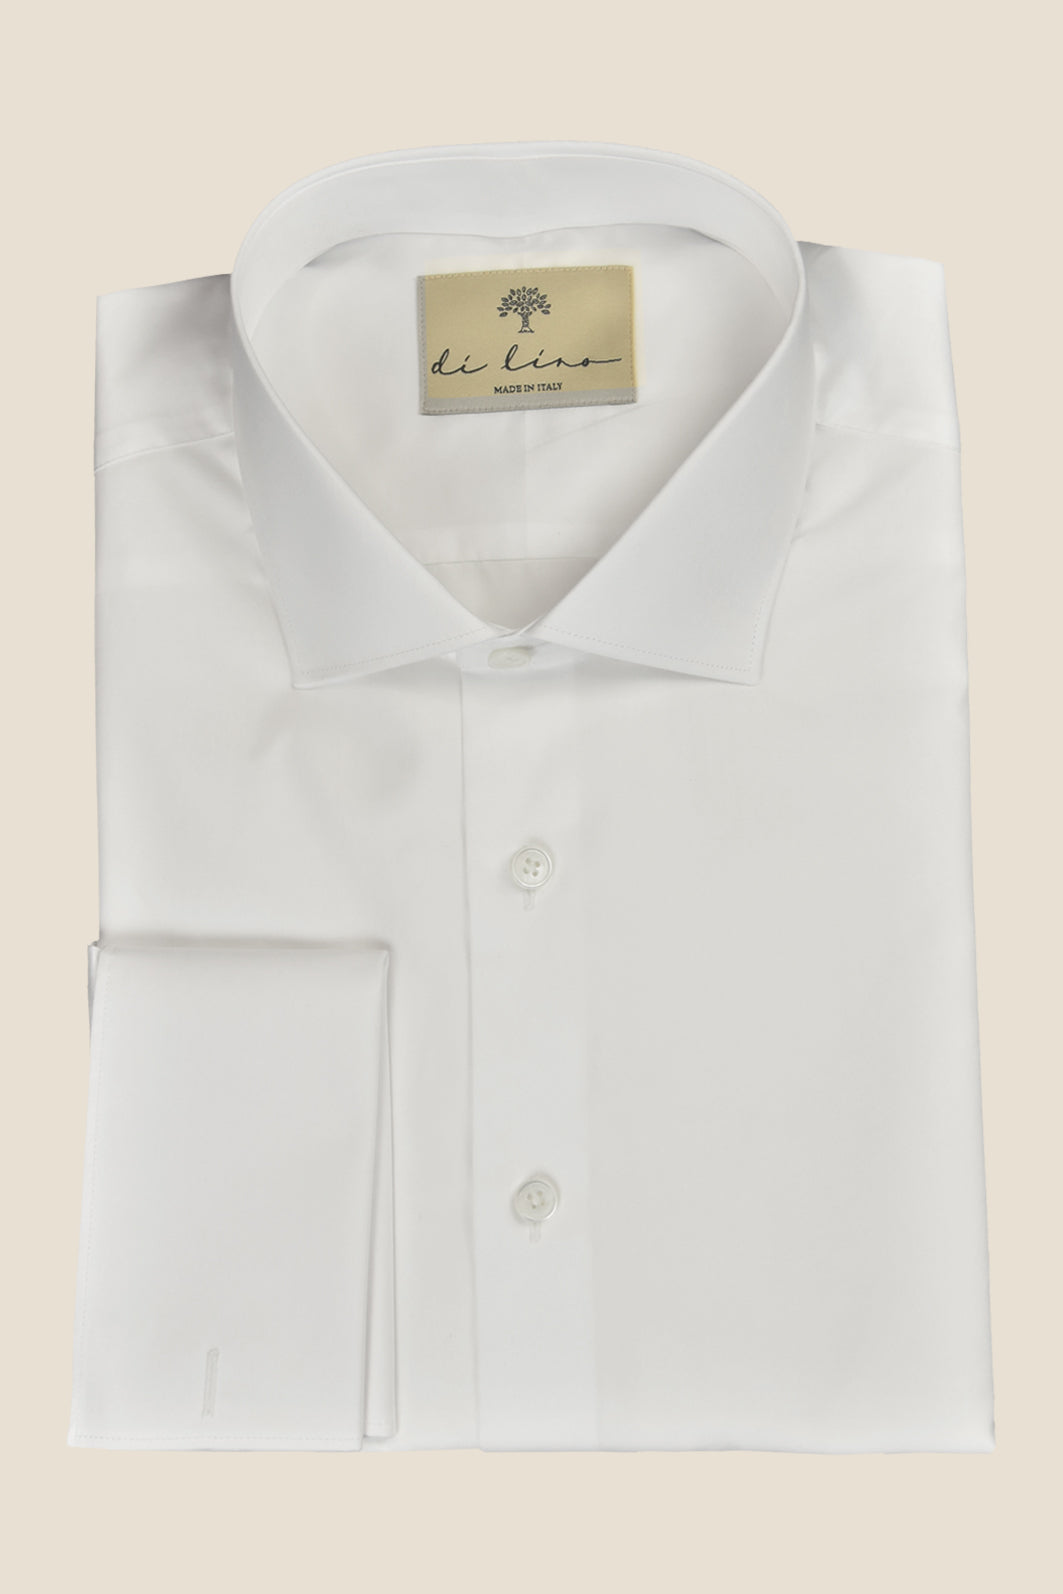 White business shirt made of organic cotton with a classic shark collar and 2% elastane - Made to order